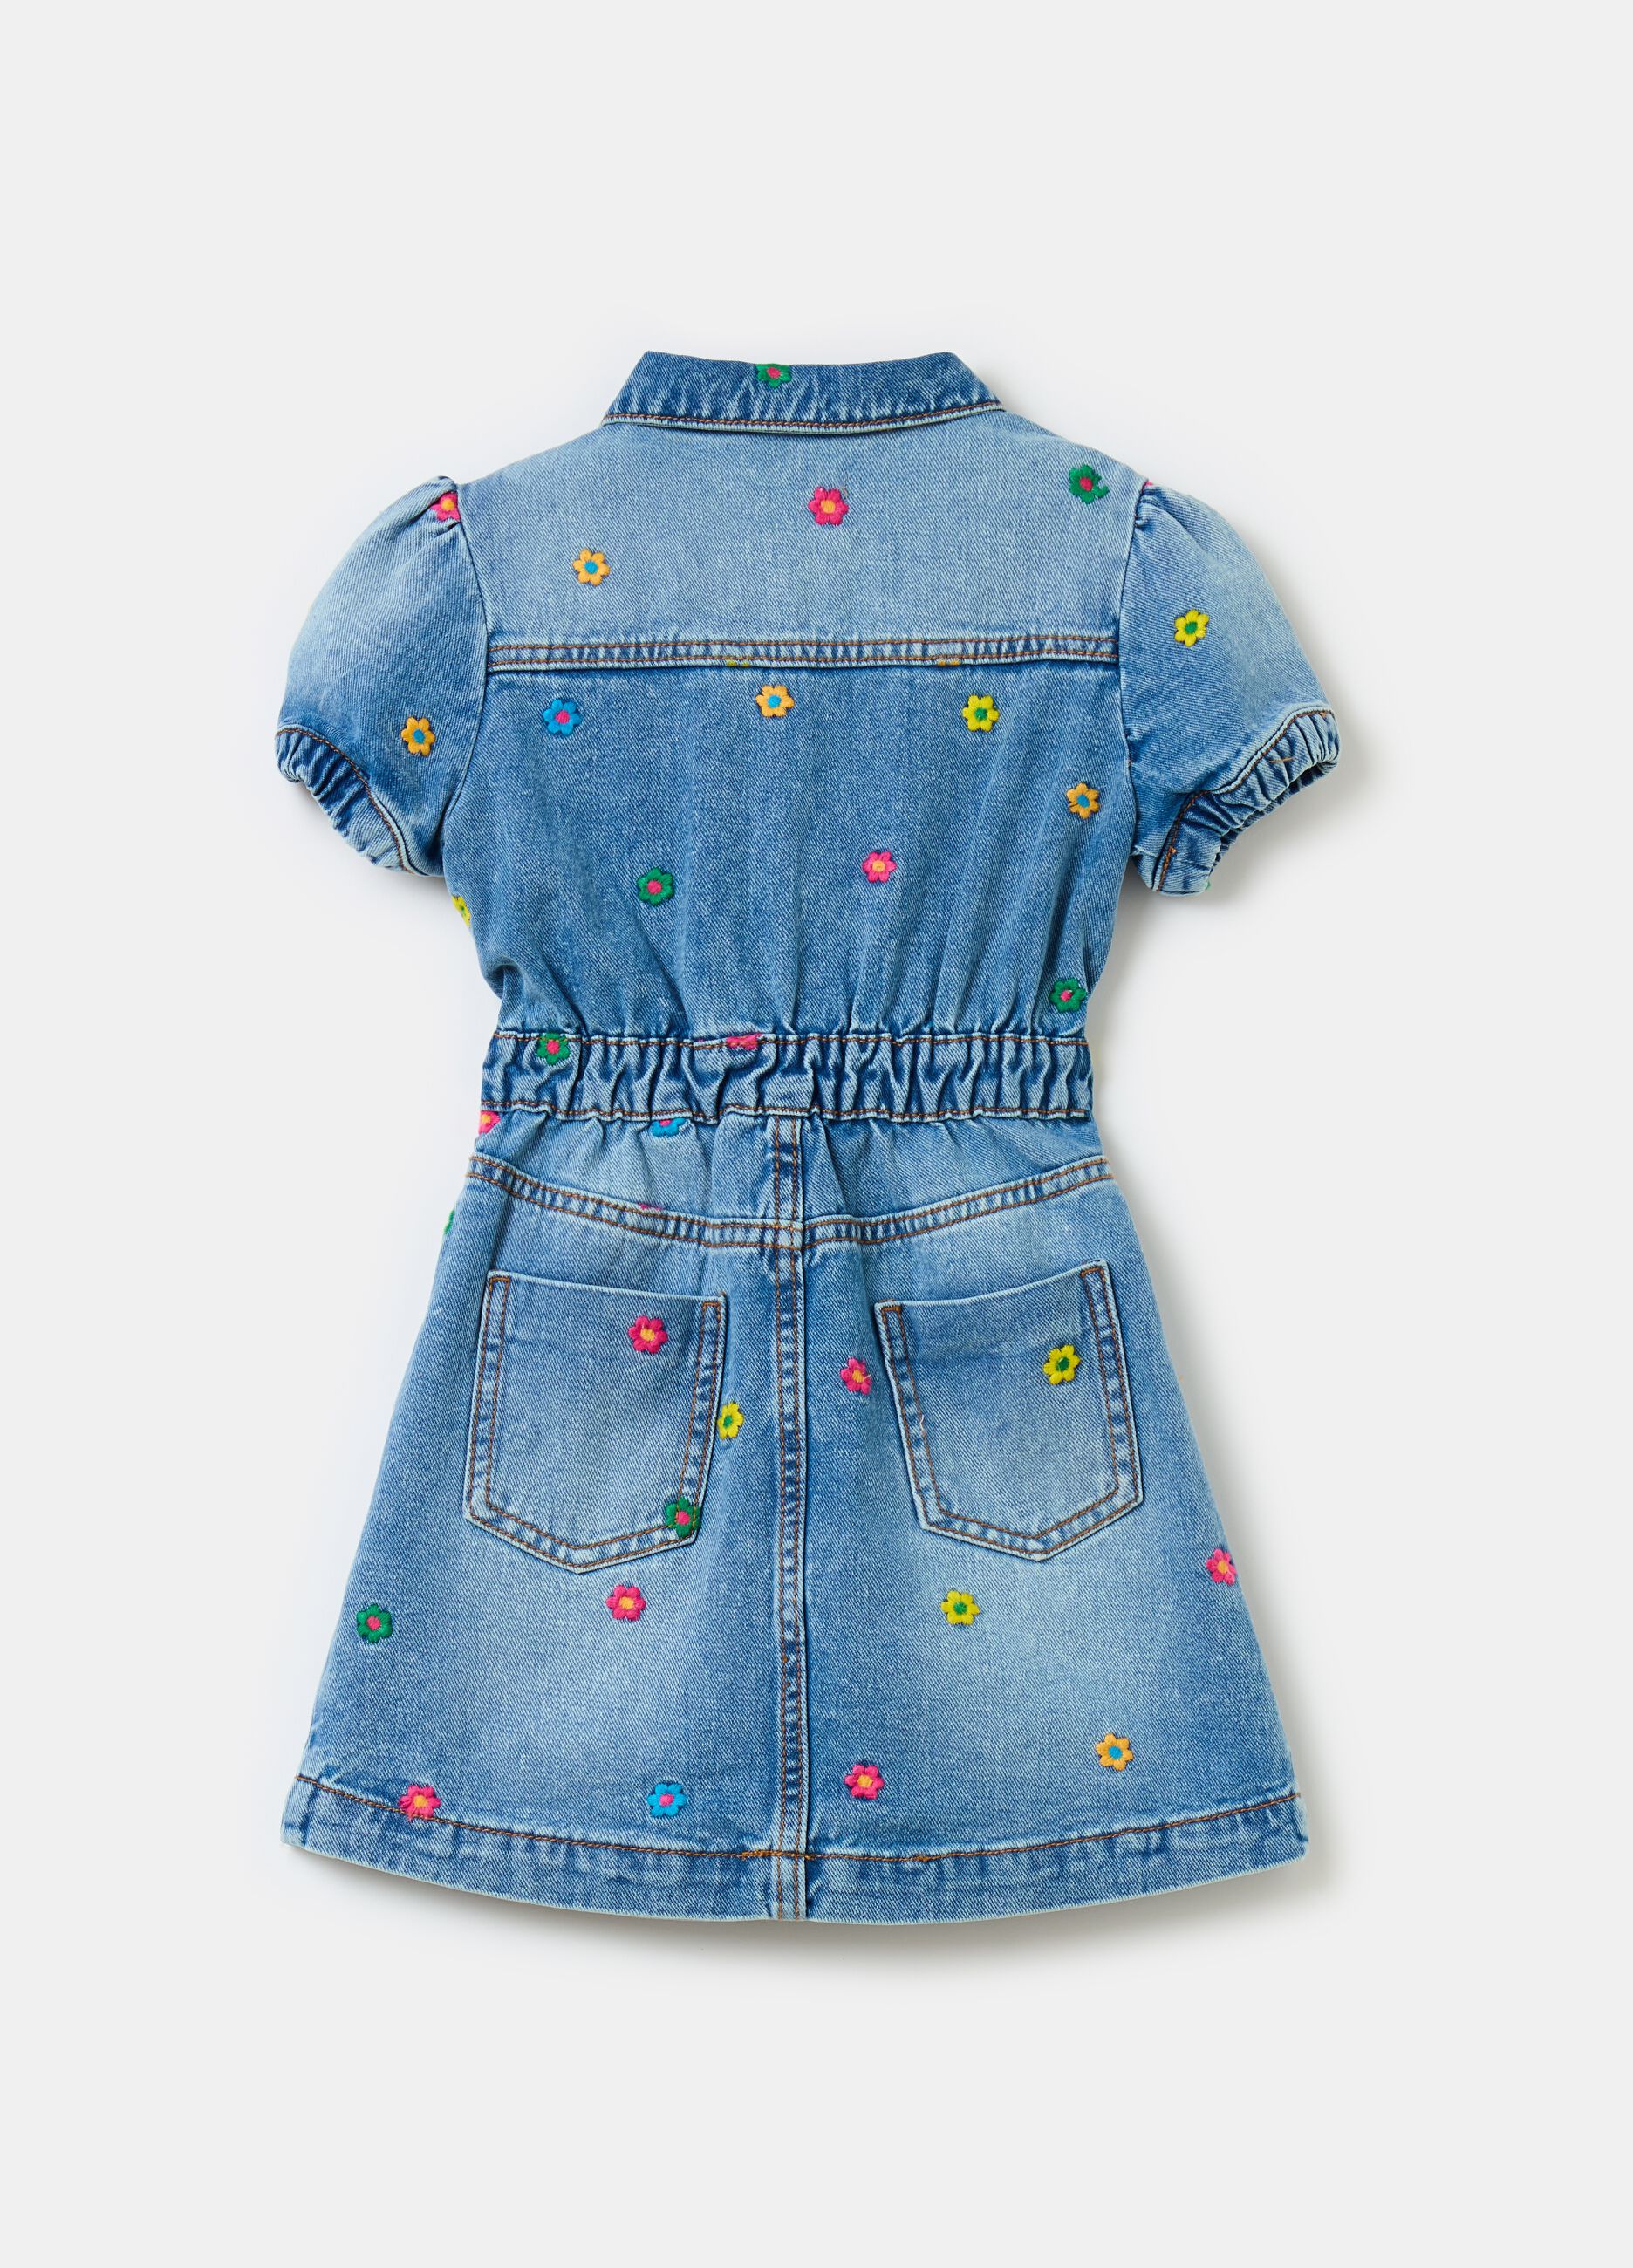 Denim dress with floral embroidery